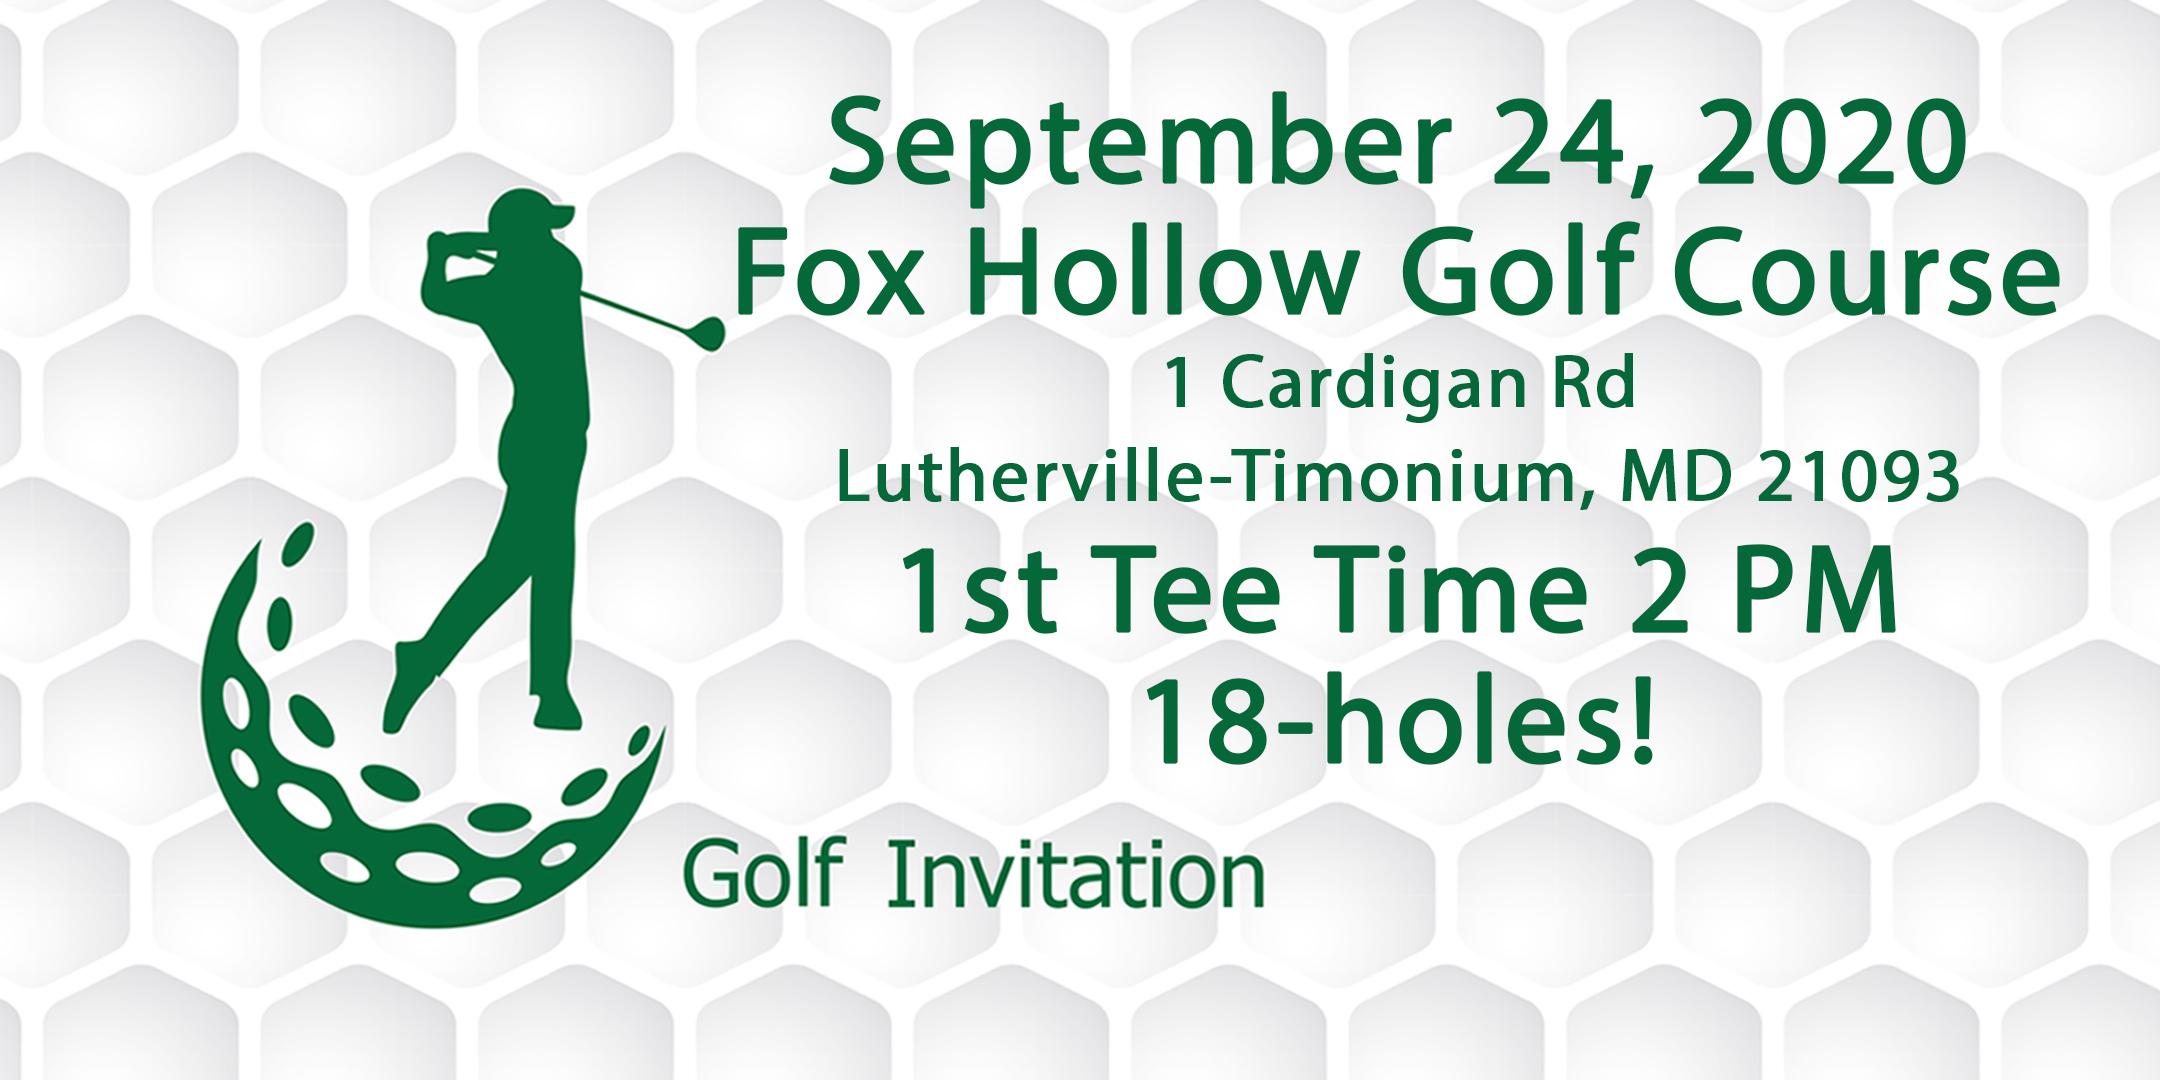 Golf Group 2020..September 24....First Tee Time 2PM...18 Holes...Fox Hollow